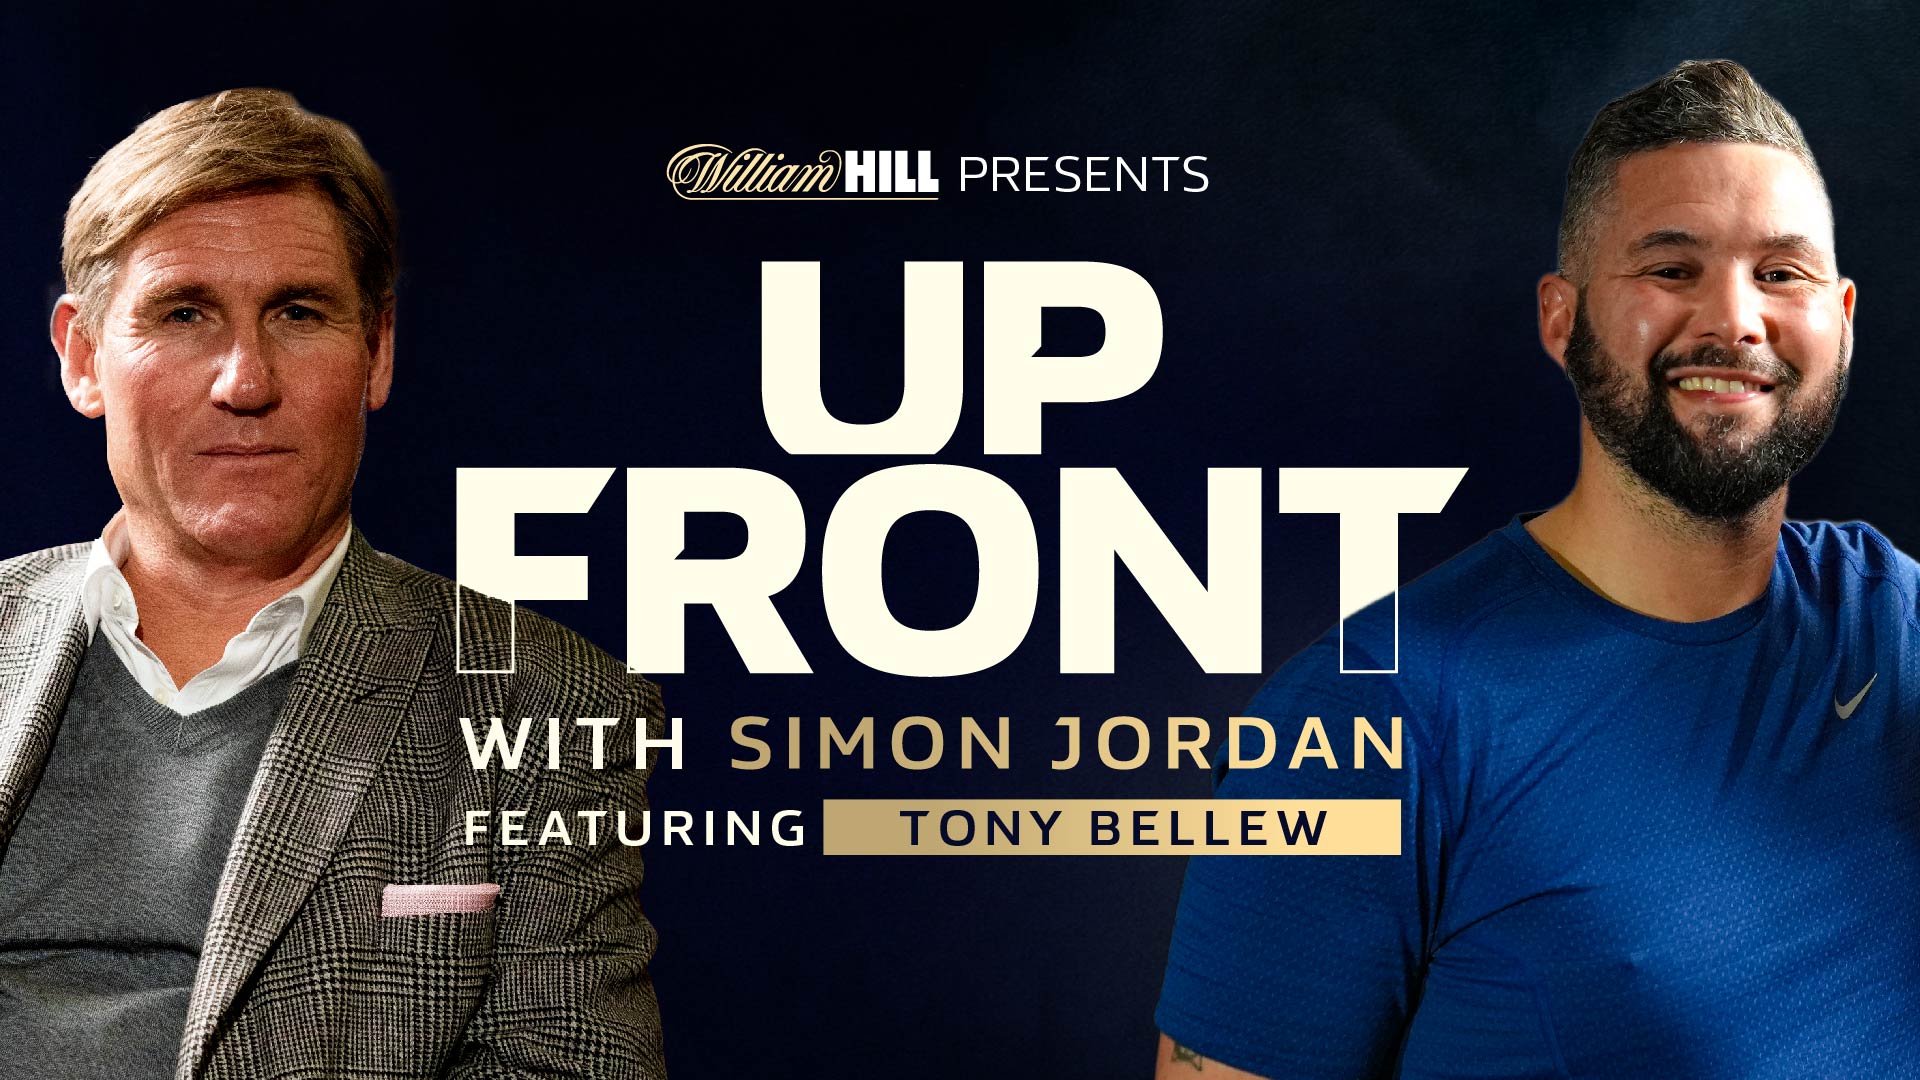 Tony Bellew joins Simon Jordan on William Hill's new podcast Up Front